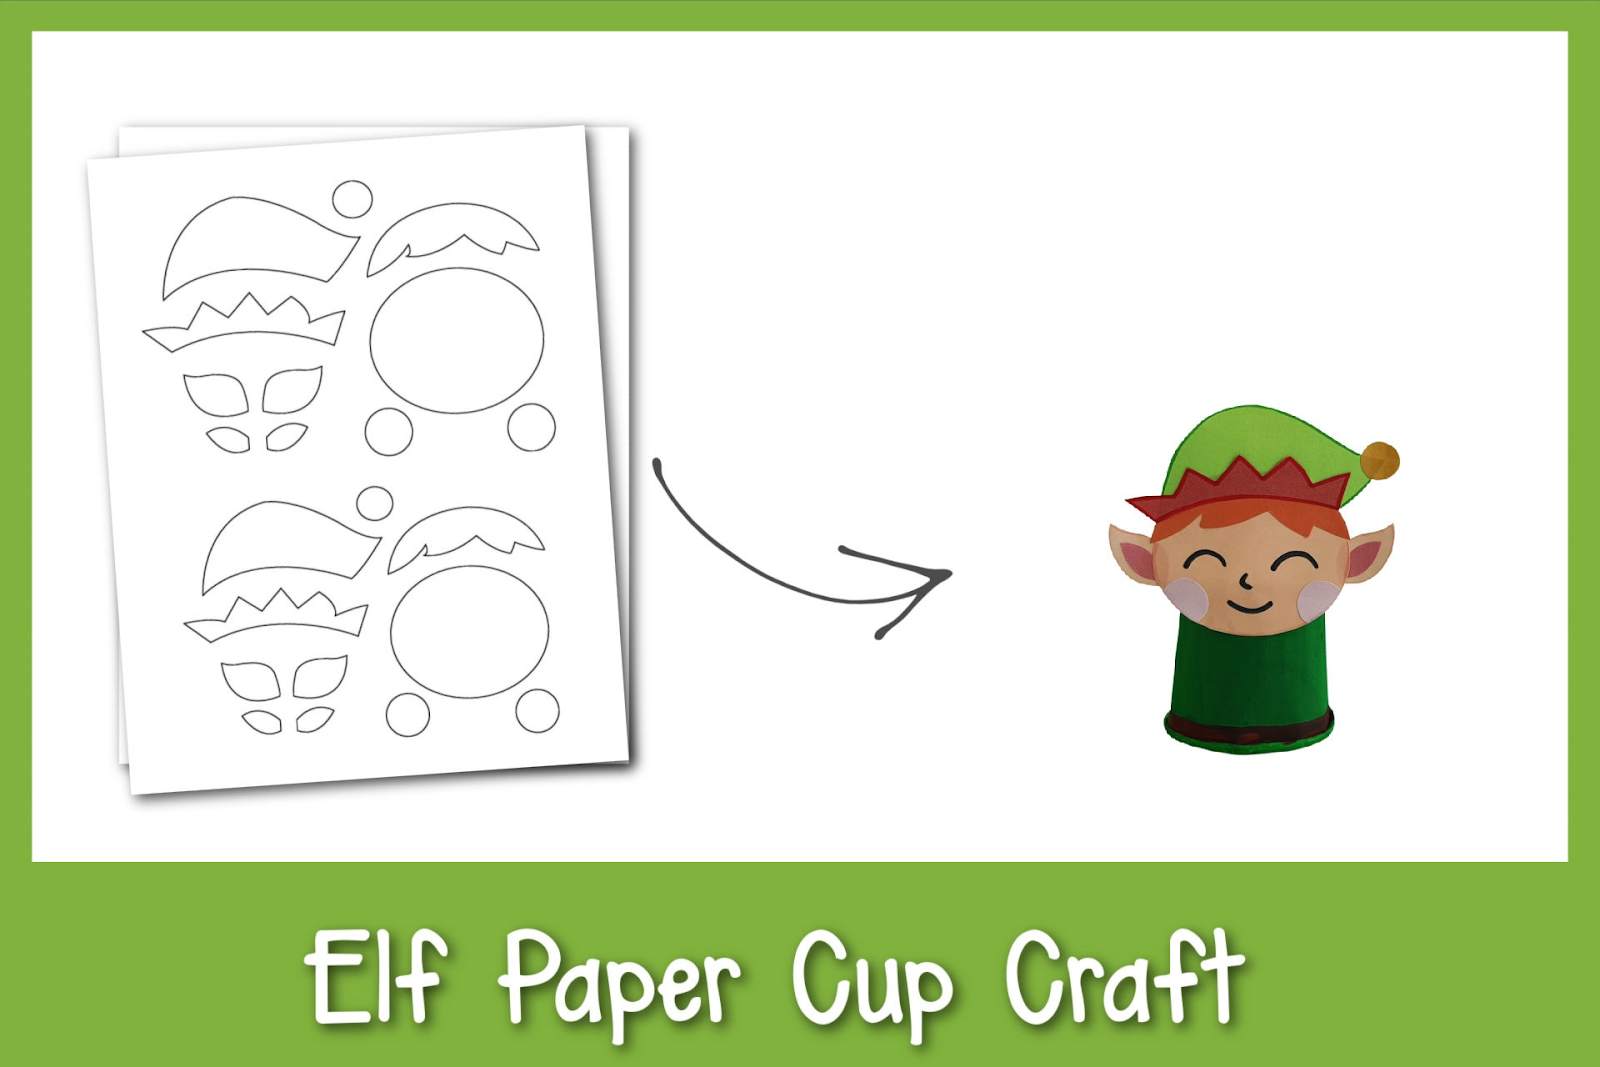 Elf paper cup craft with template with green hat